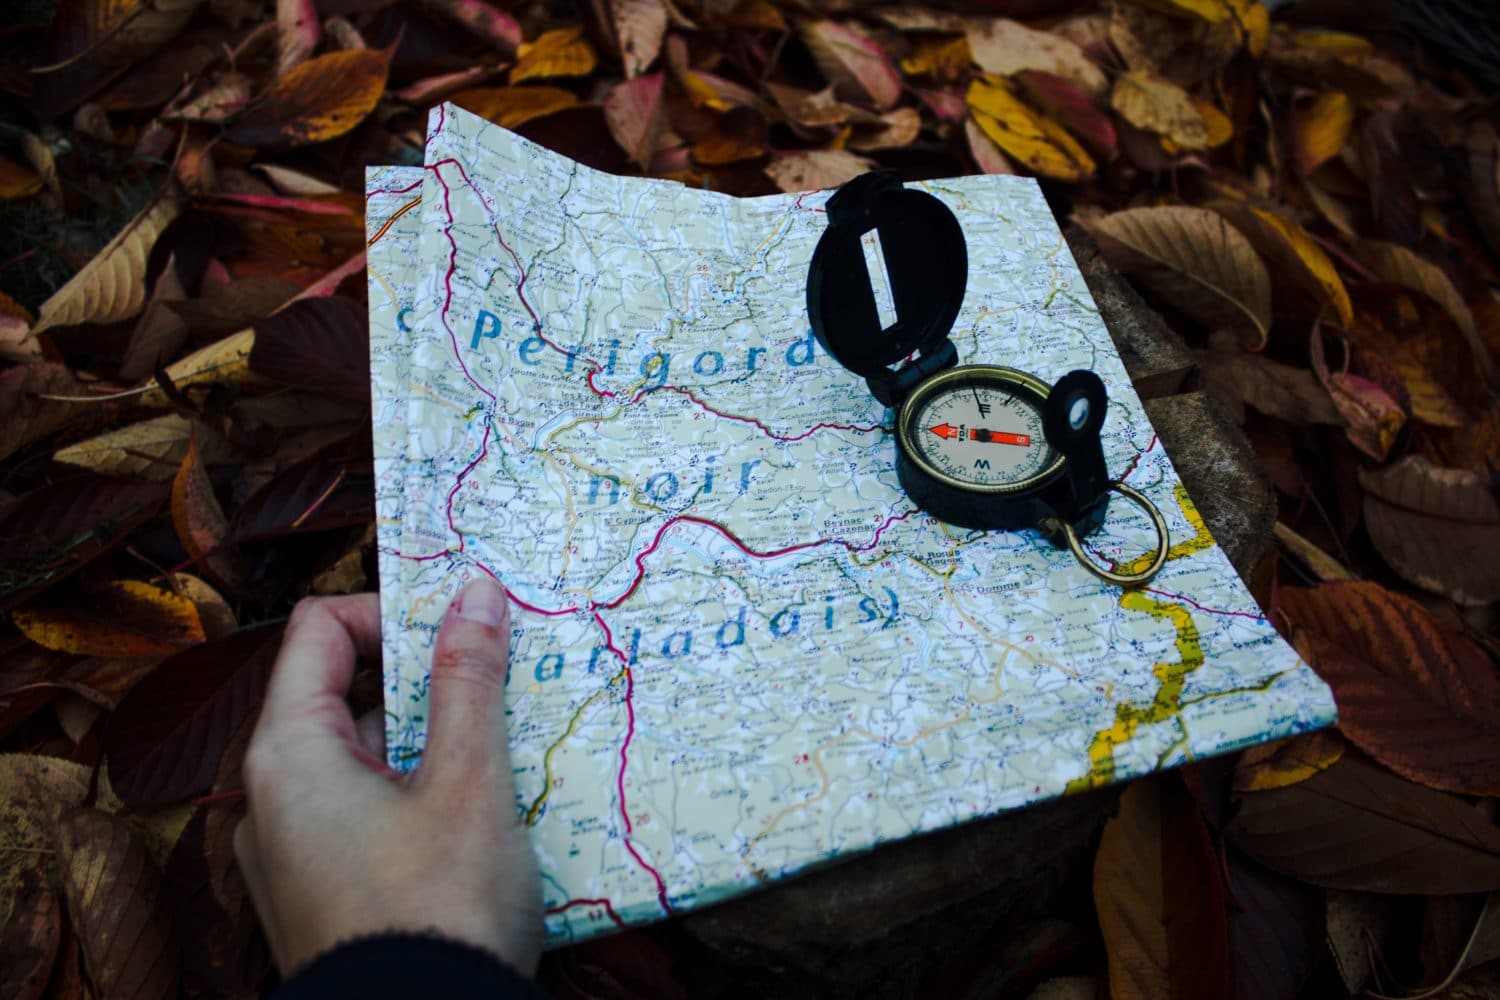 A map and compass to point you in the right direction.